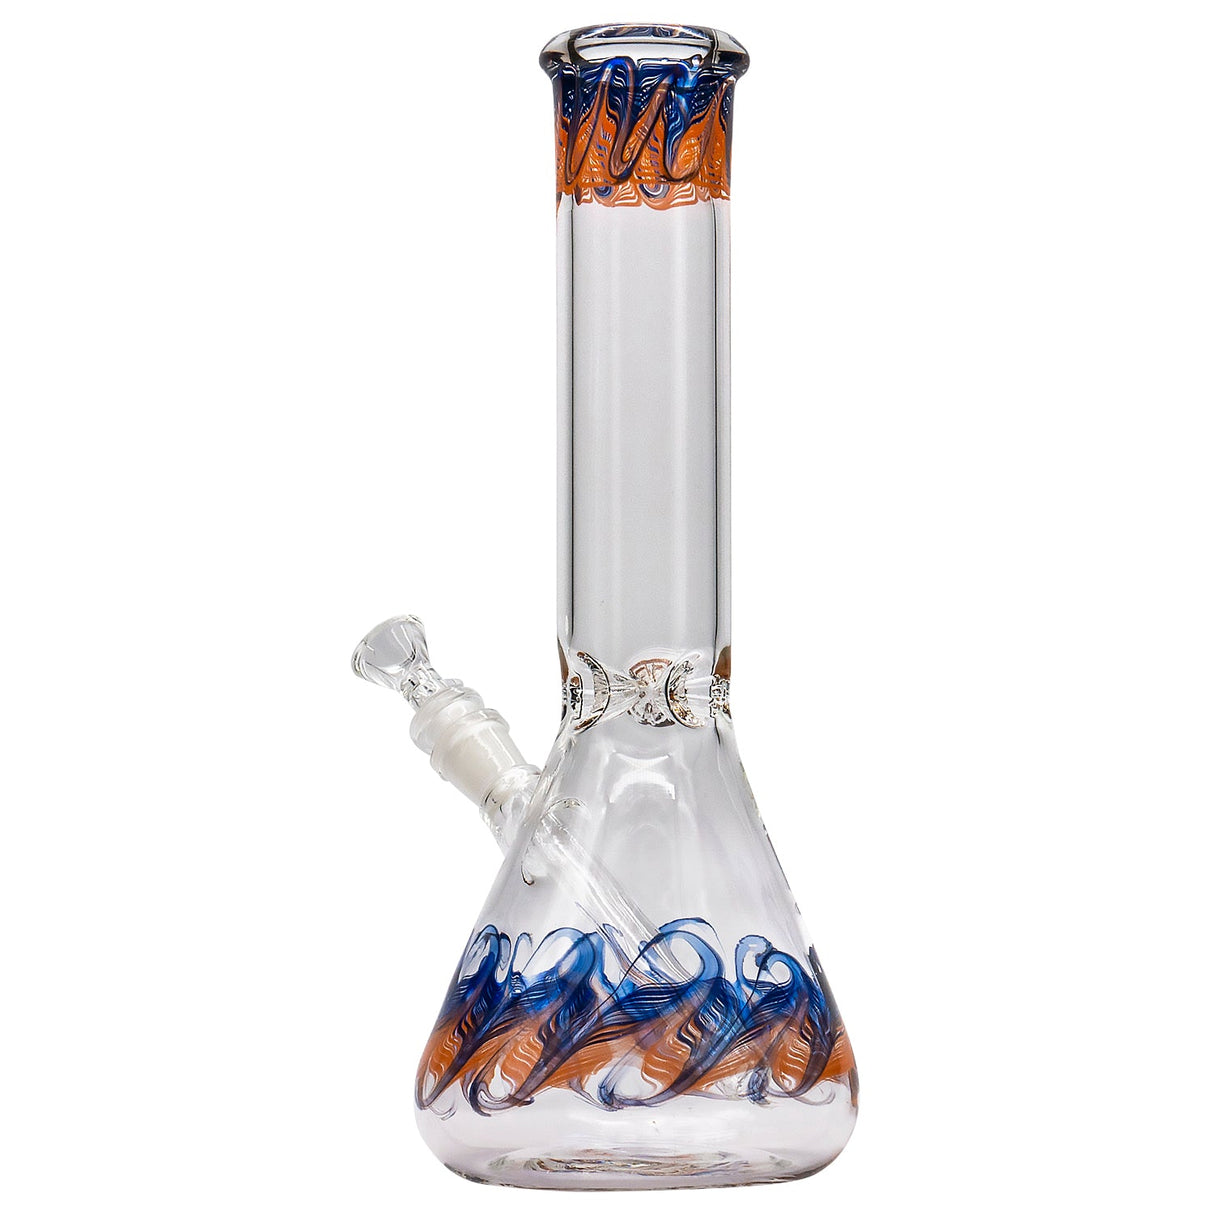 LA Pipes 'Phoenix Rising' Color Wrapped Beaker Bong for Dry Herbs, 12-inch, USA Made